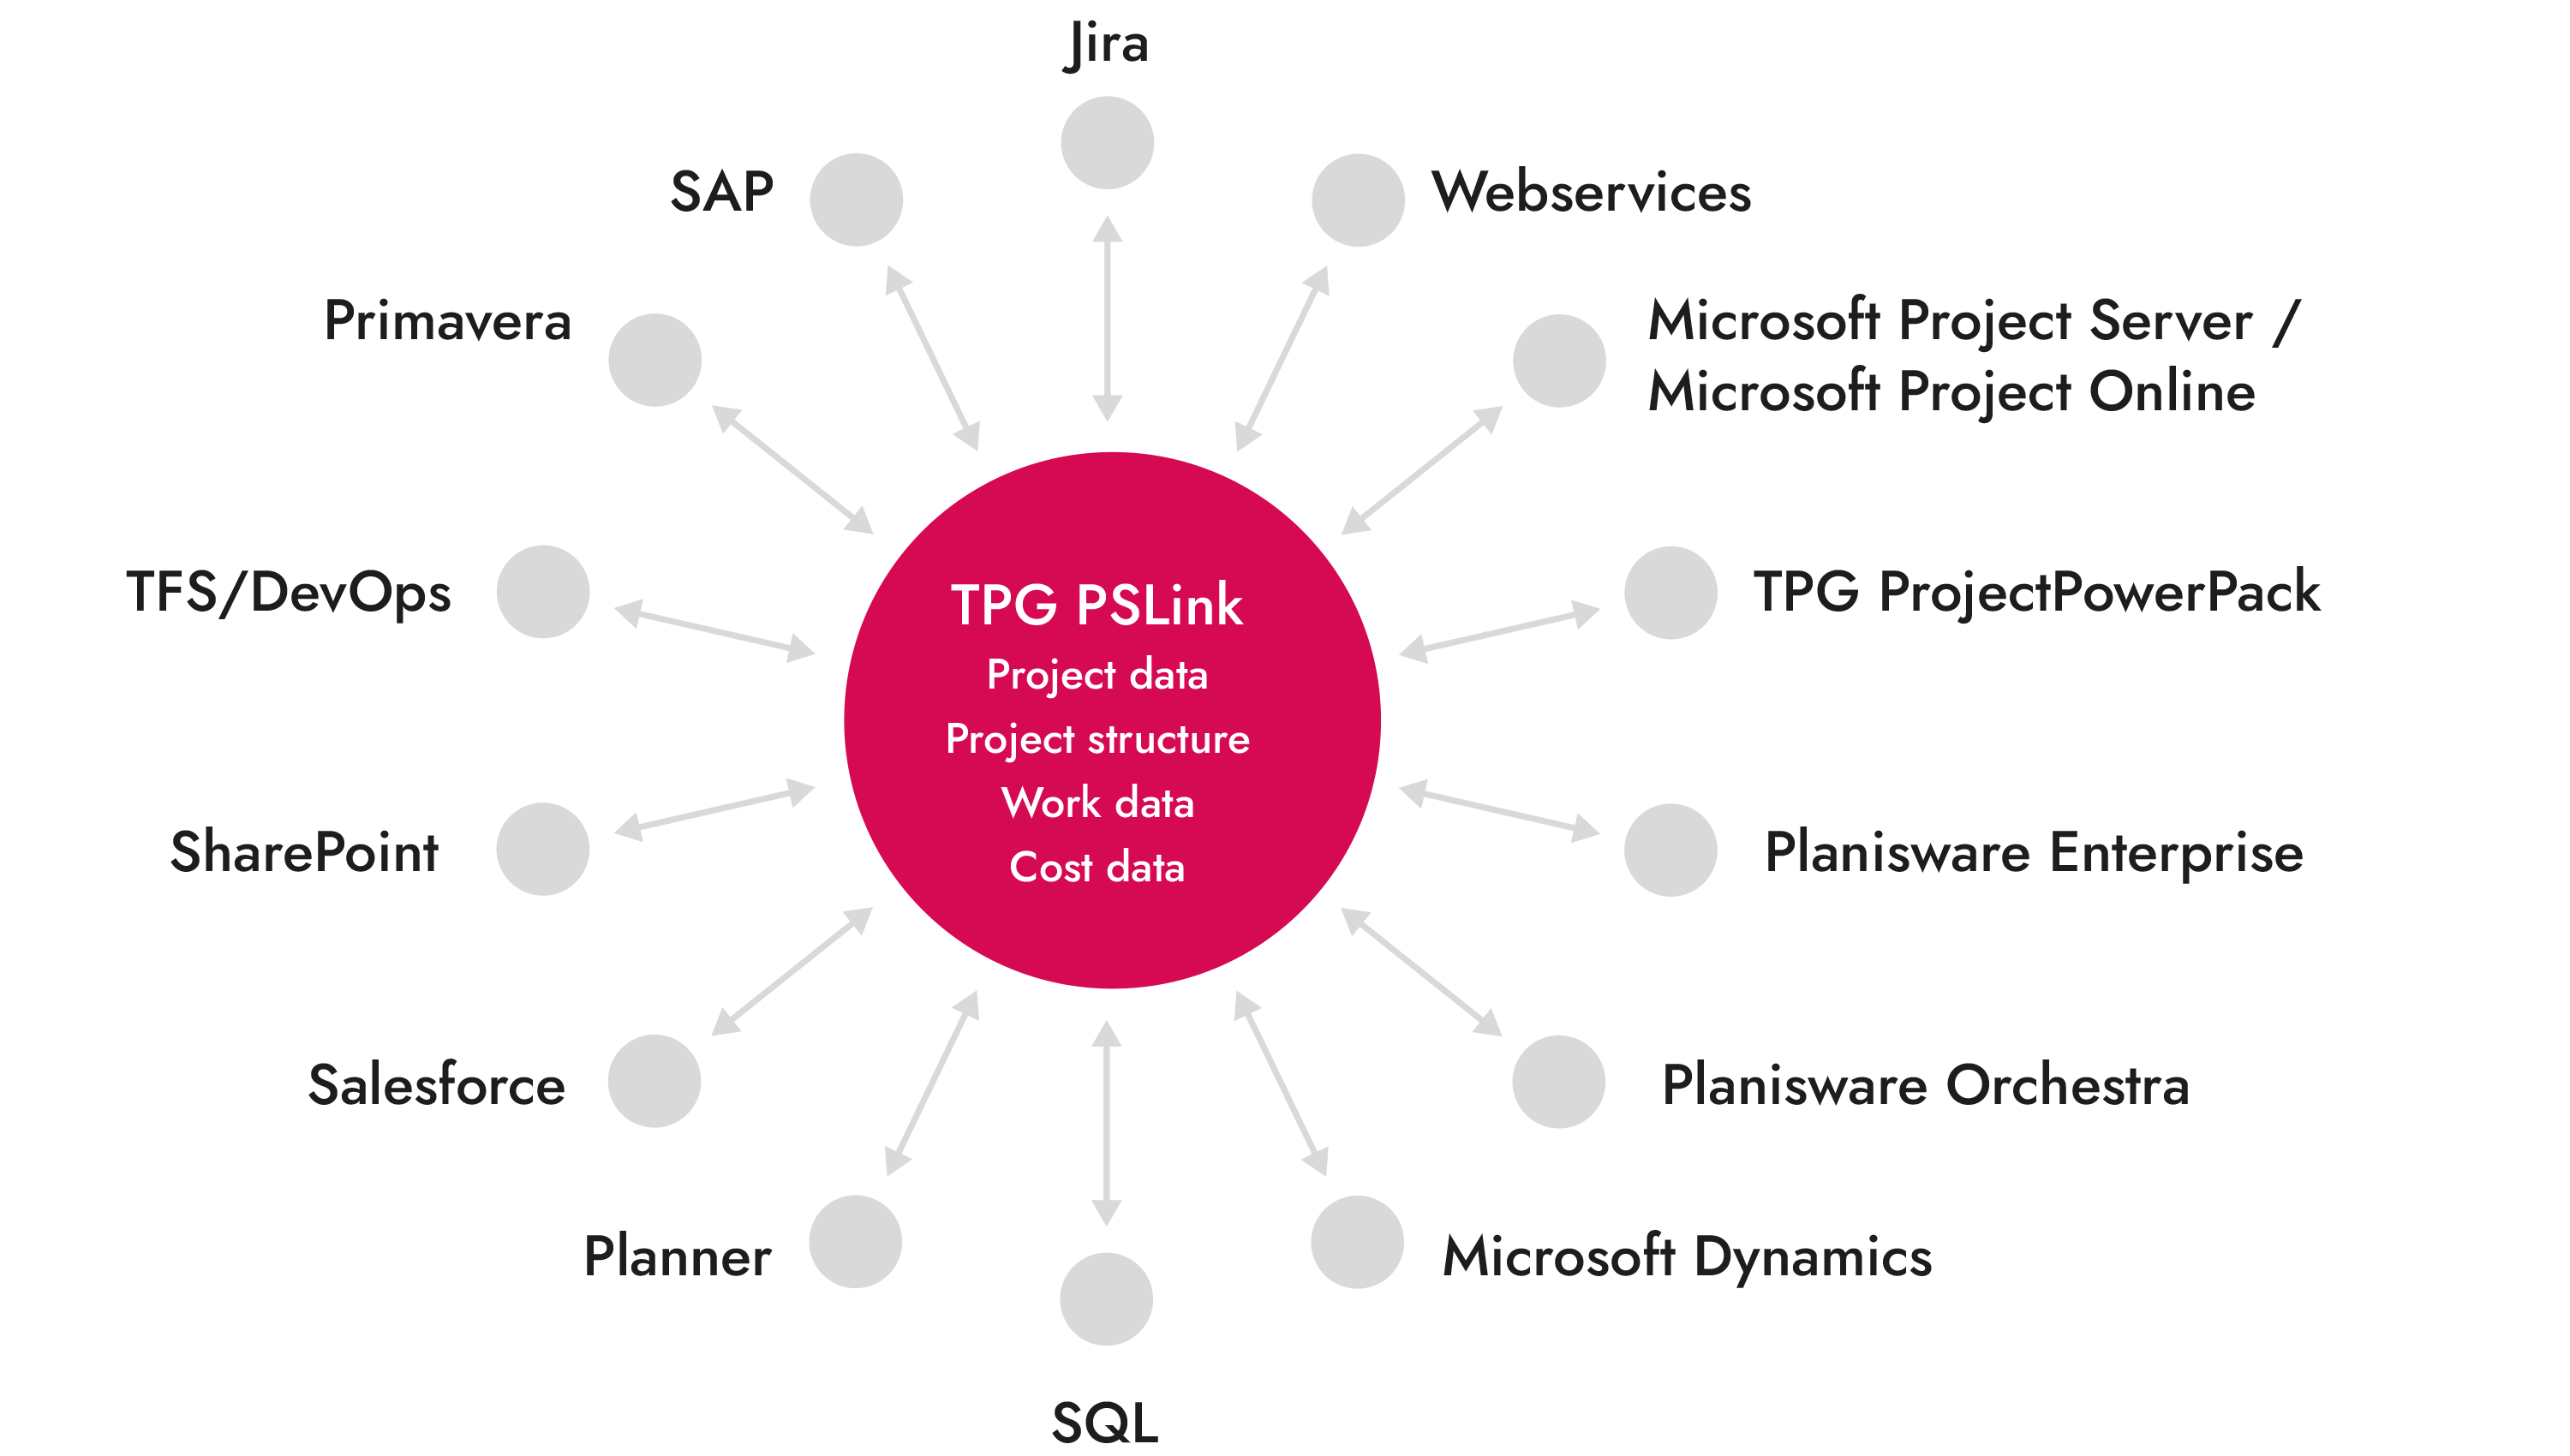 Integration TFS / DevOps with MS Project